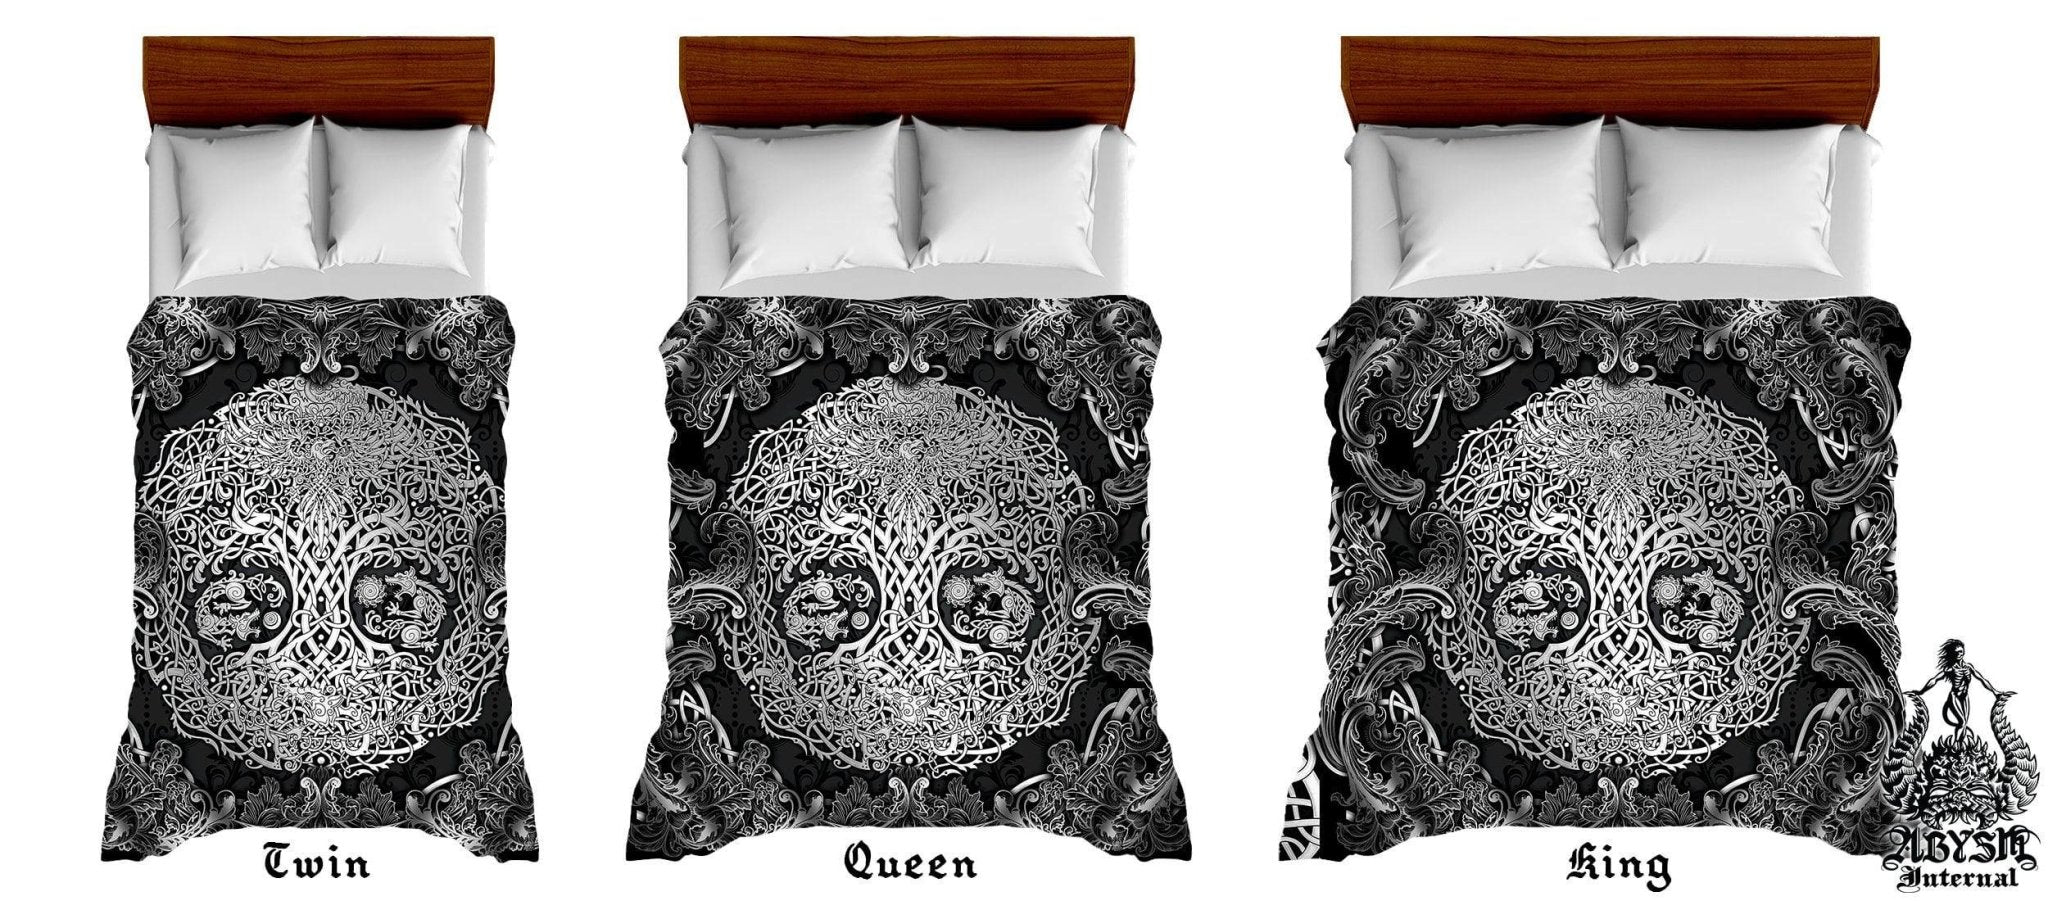 Viking Bedding Set, Comforter and Duvet, Yggdrasil Bed Cover and Bedroom Decor, Norse Art, King, Queen and Twin Size - Dark - Abysm Internal